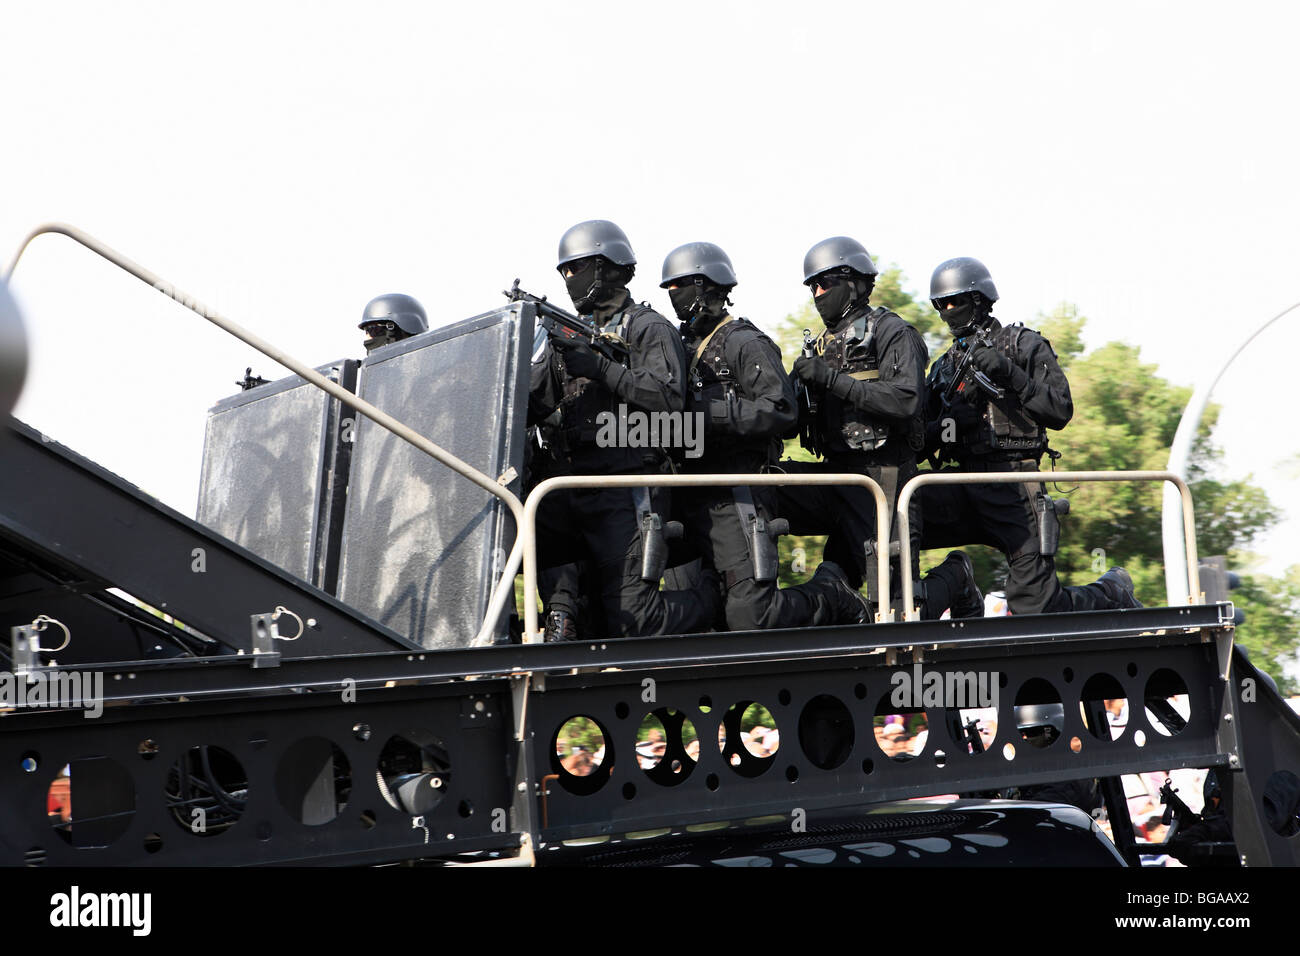 Black-clad security forces, ready for action, taking part in a military parade to mark Qatar National Day, December 18, 2009 Stock Photo